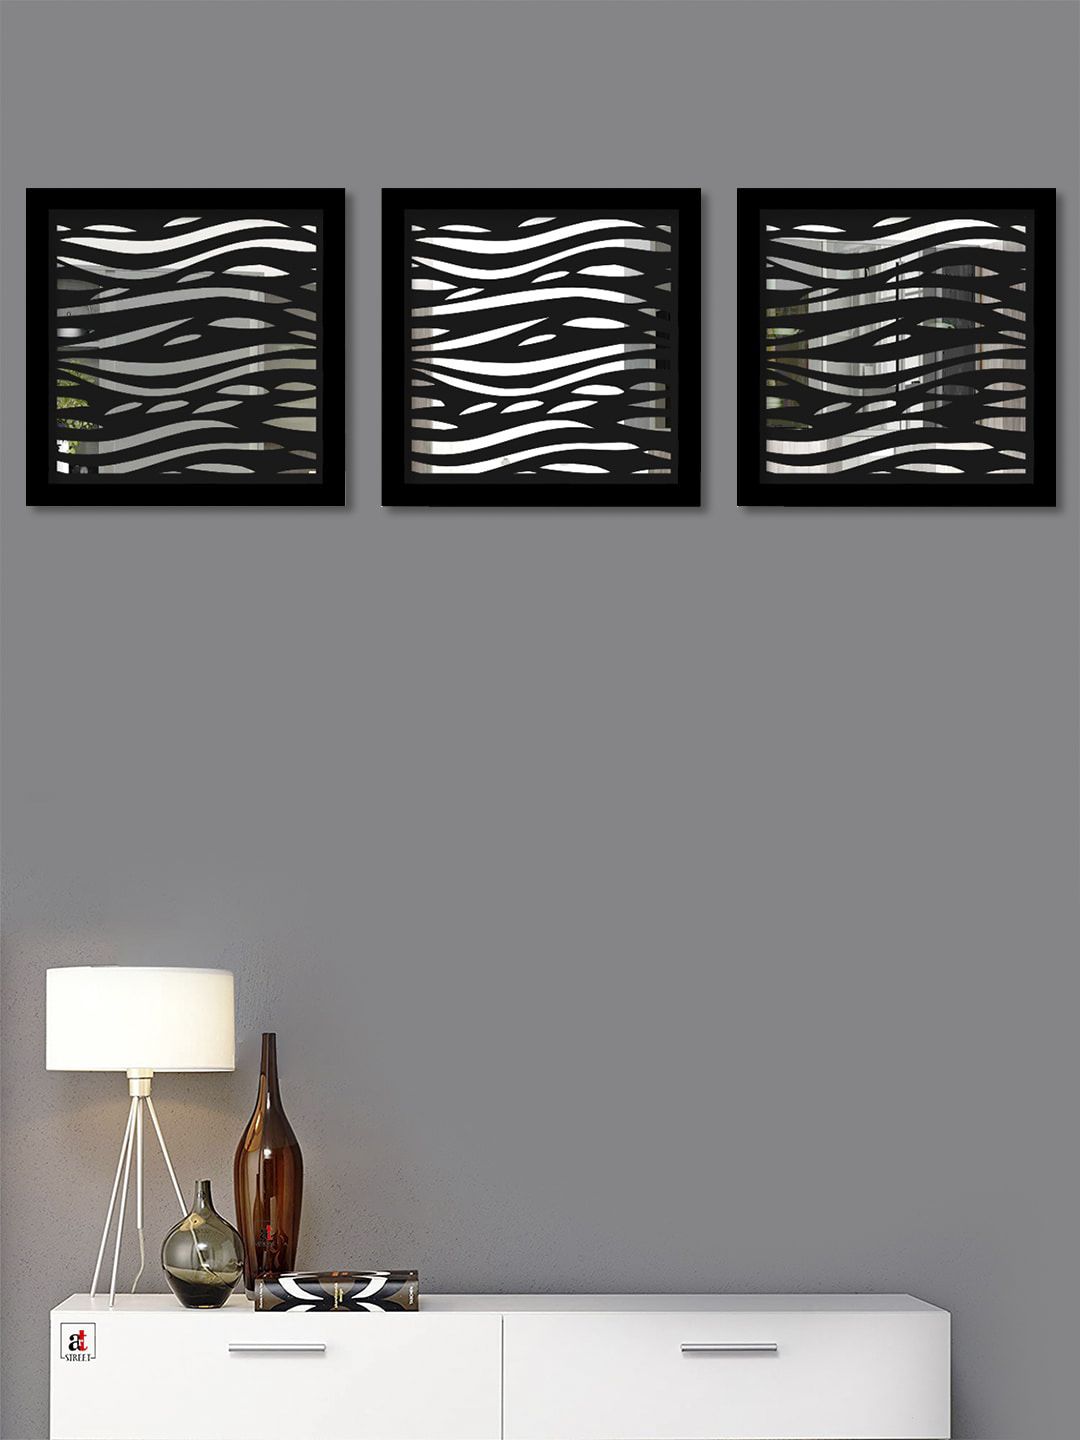 Art Street Decorative Black Wall Mirror Square Shape - Set of 3 Price in India